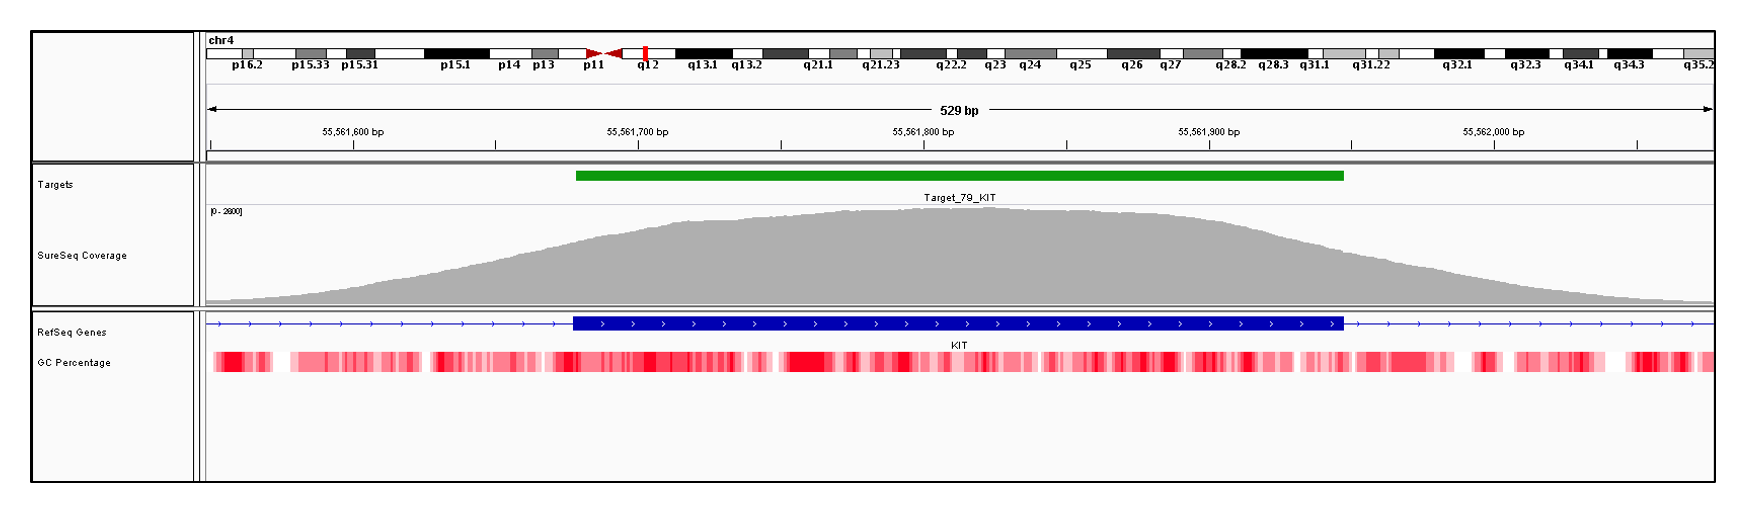 KIT Exon 2 (hg19 chr4:55561678-55561947). Depth of coverage per base (grey). Targeted region (green). Gene coding region as defined by RefSeq (blue). GC percentage (red). Image